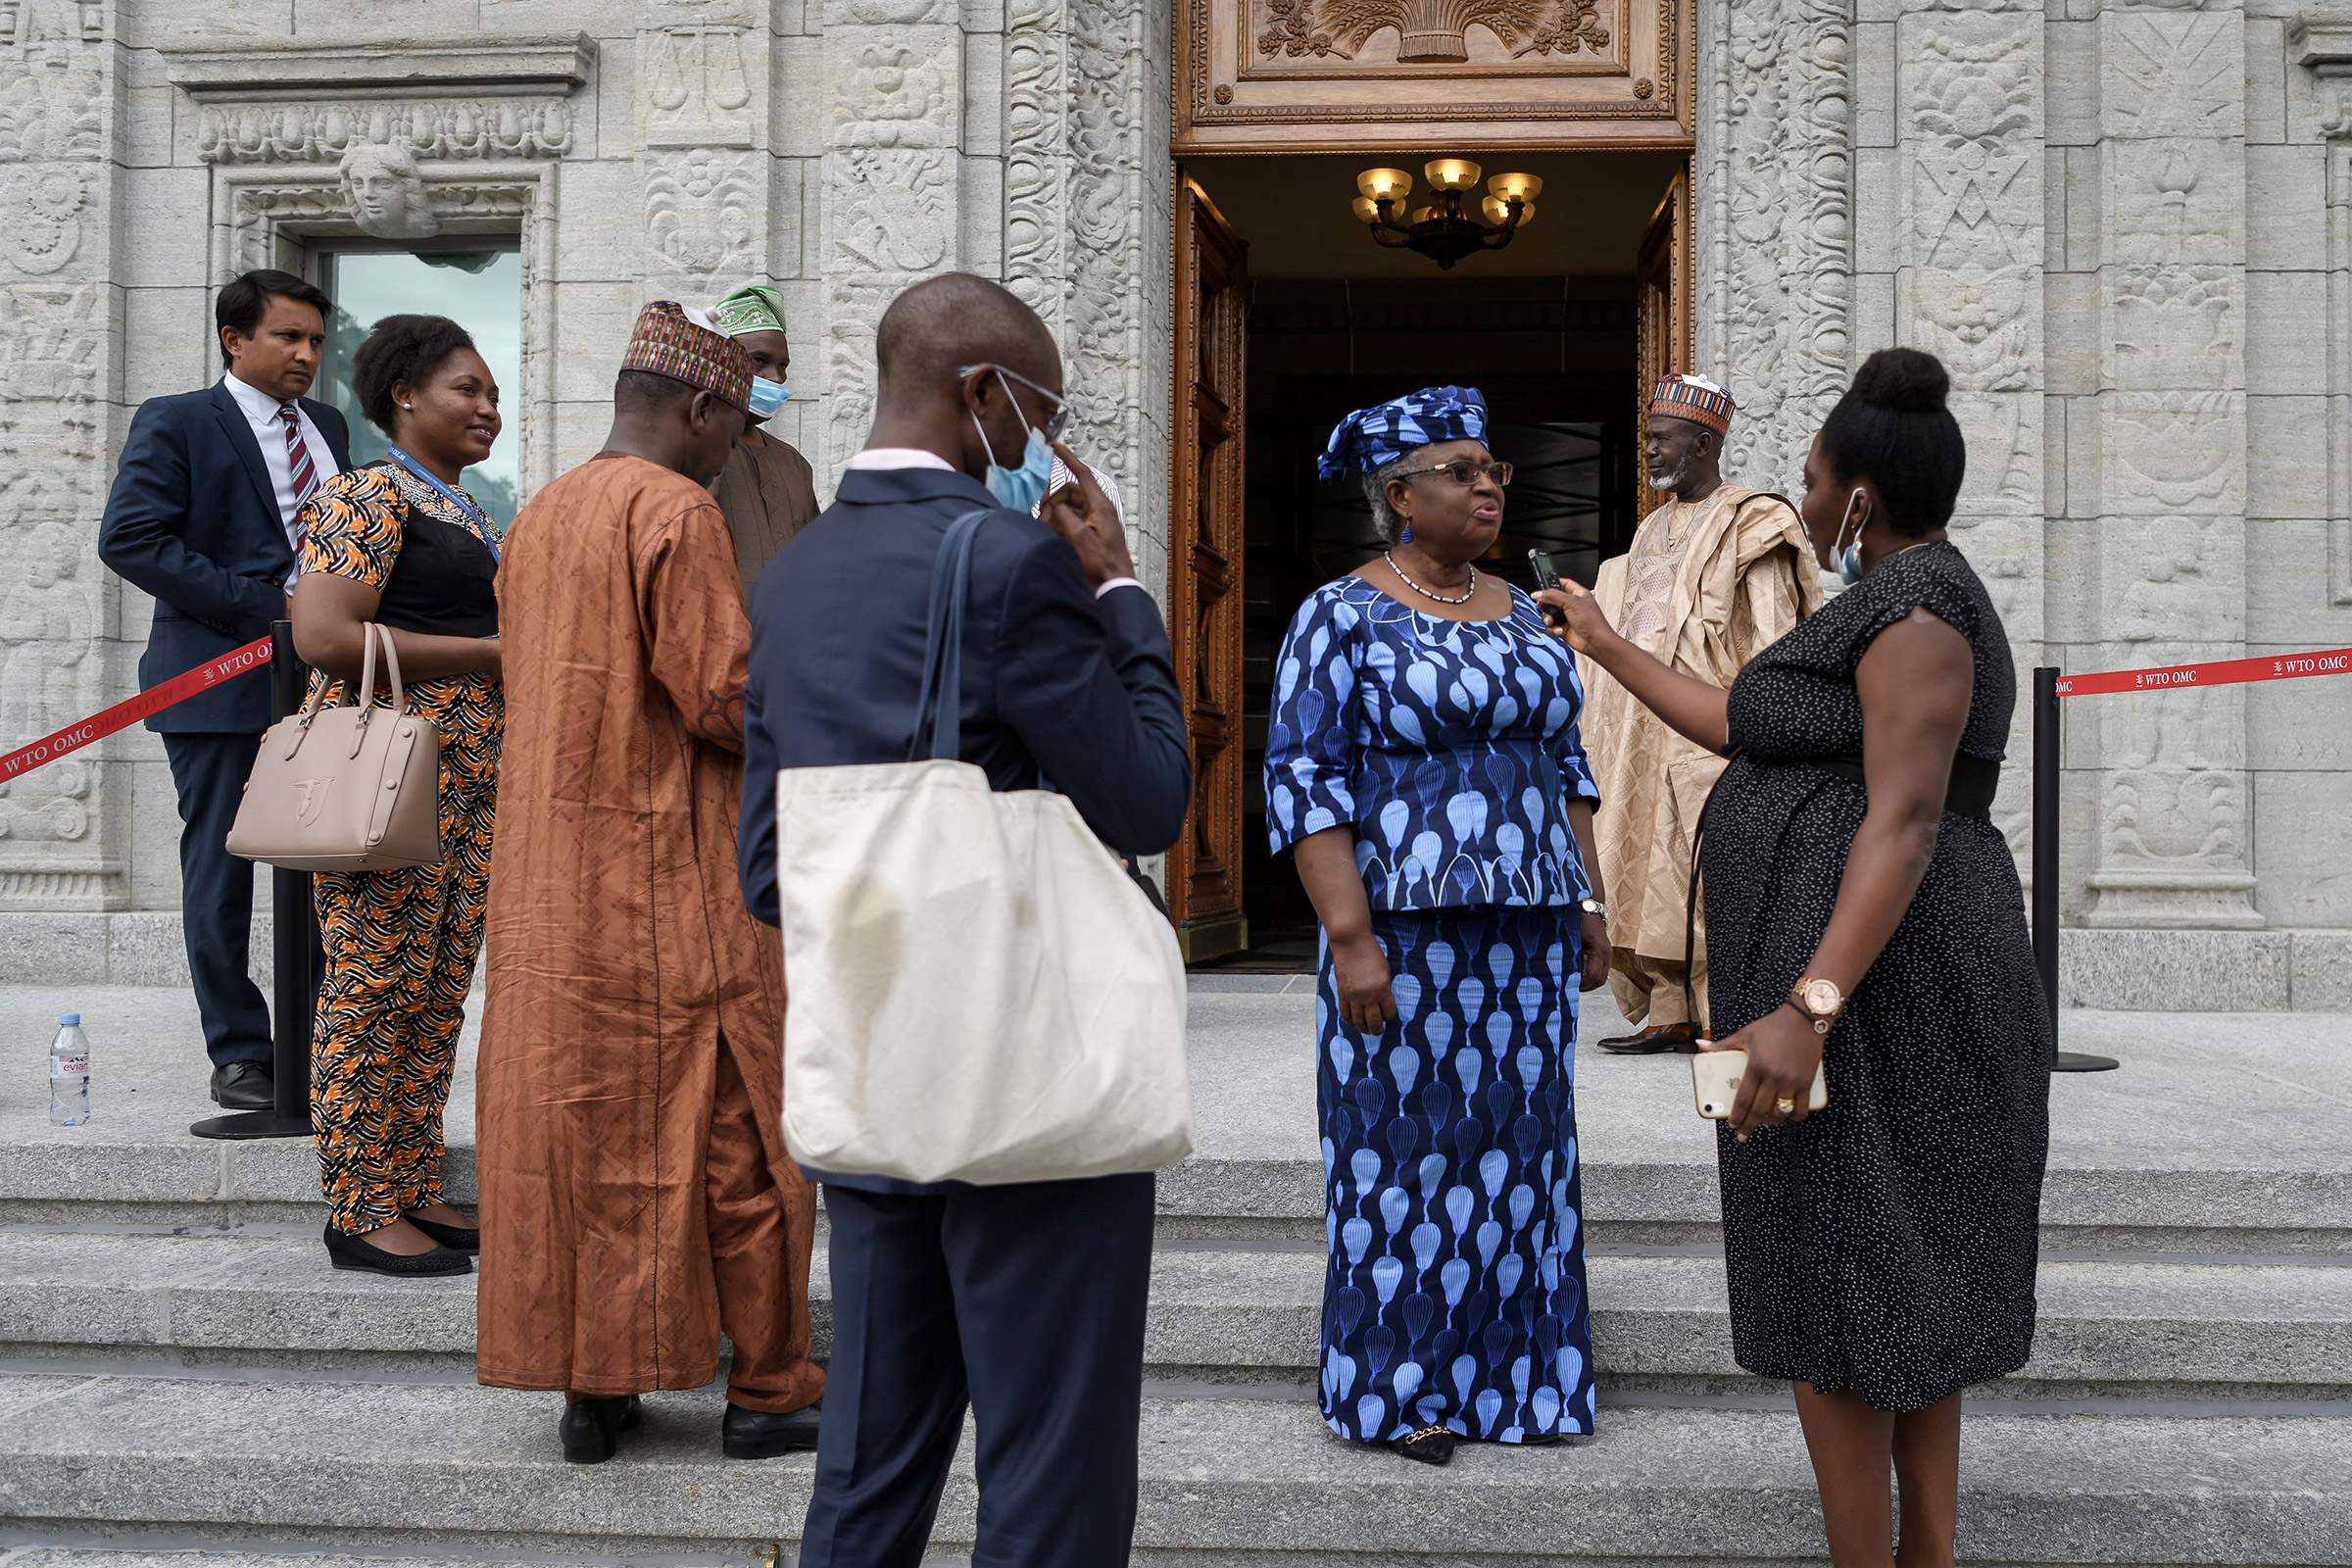 Nigerian former Foreign and Finance Minister Ngozi Okonjo-Iweala speaks to a journalist in Geneva, on July 15, 2020. (Fabrice Coffrini—AFP/Getty Images)